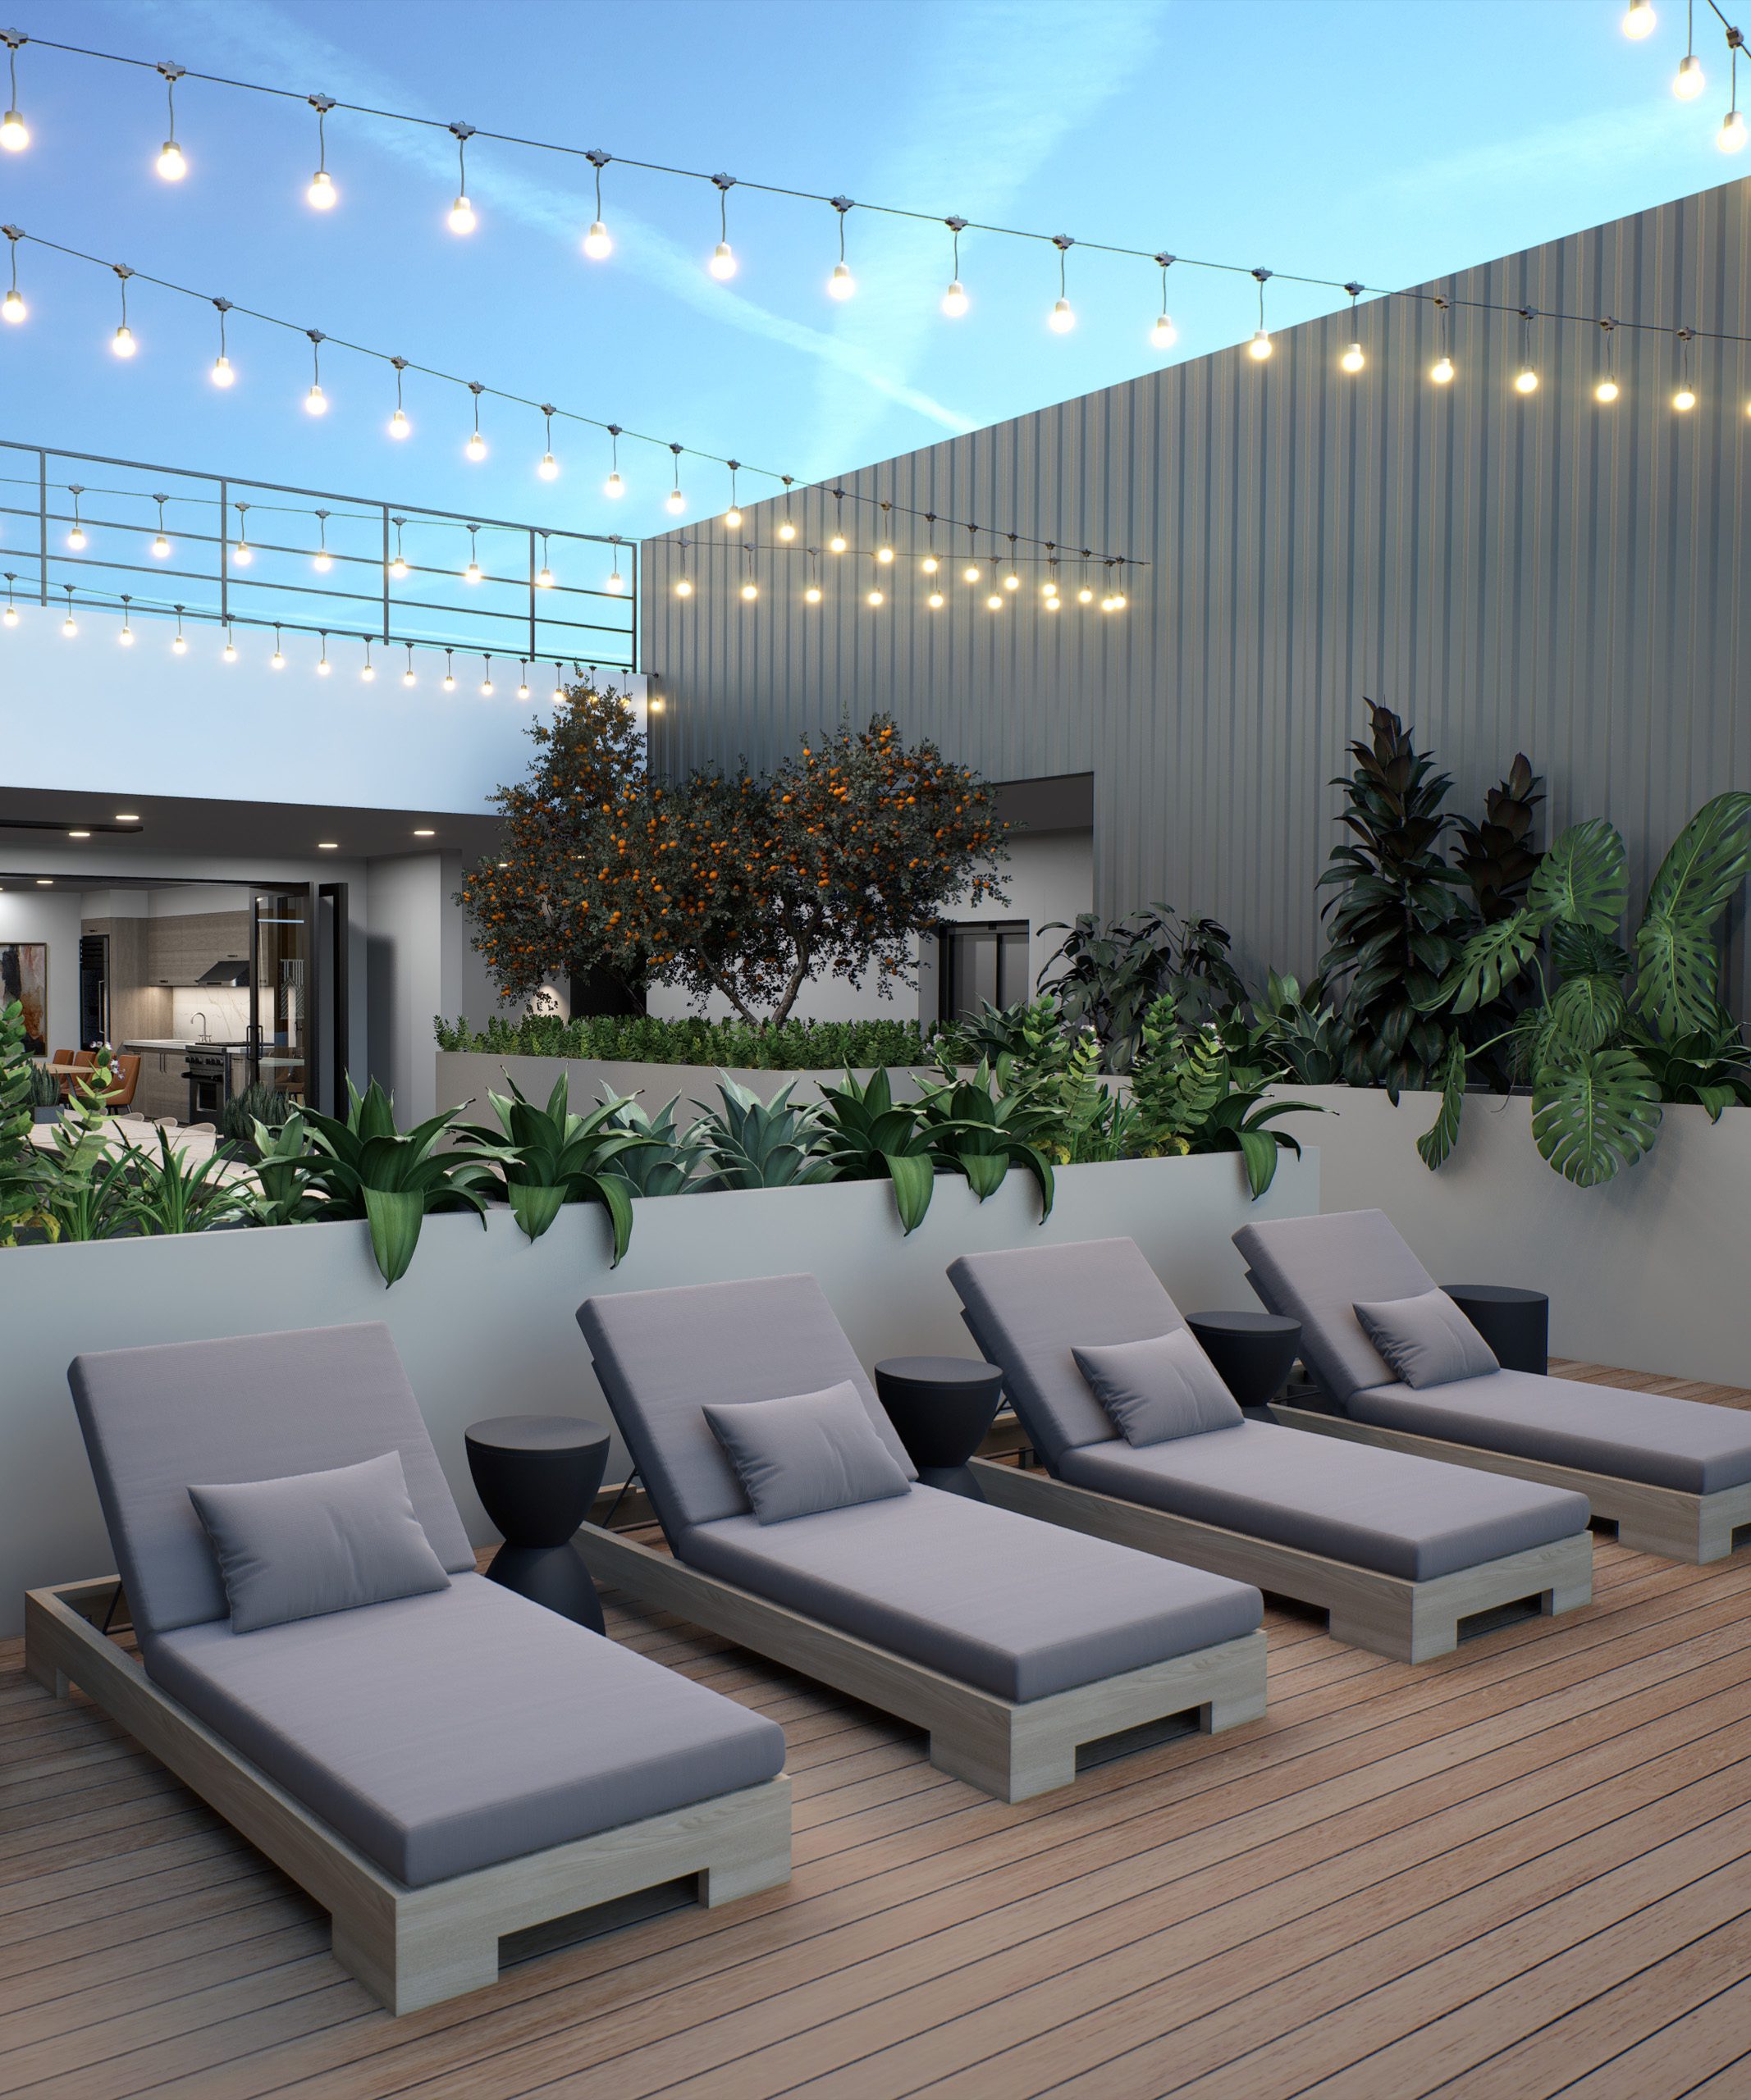 Gray lounge chairs on outdoor patio with greenery and string lights above